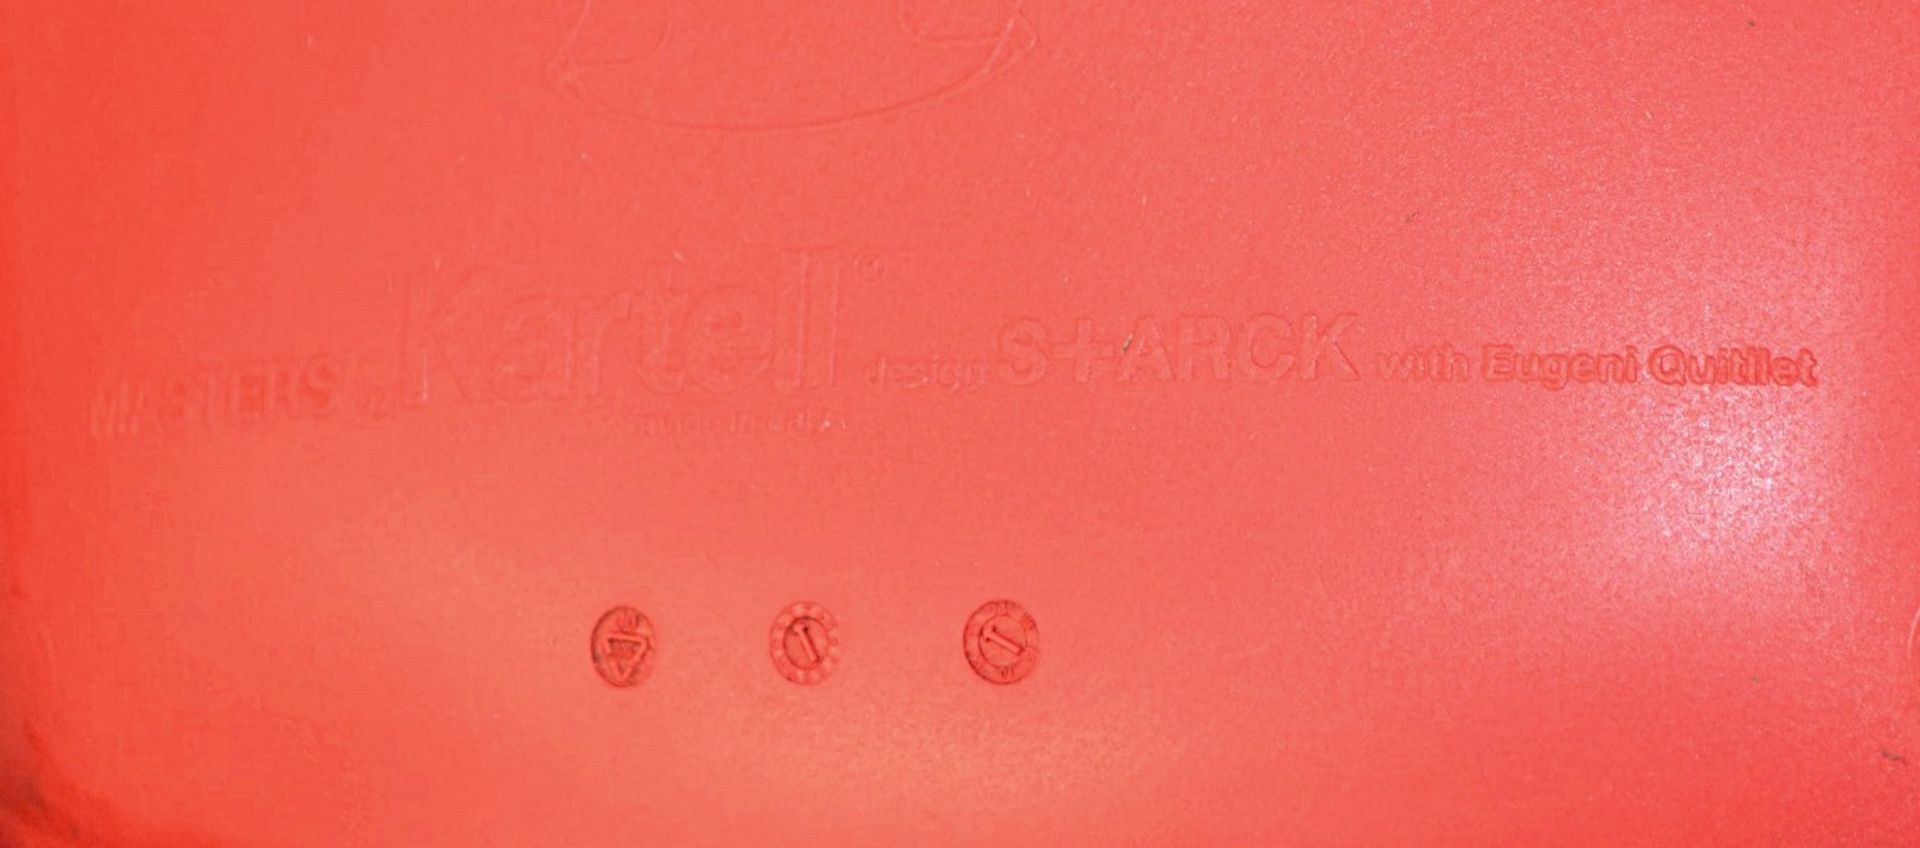 10 x Philippe Starck For Kartell 'Masters' Designer Red Gloss Bistro Chairs - Made In Italy - Used - Image 7 of 9